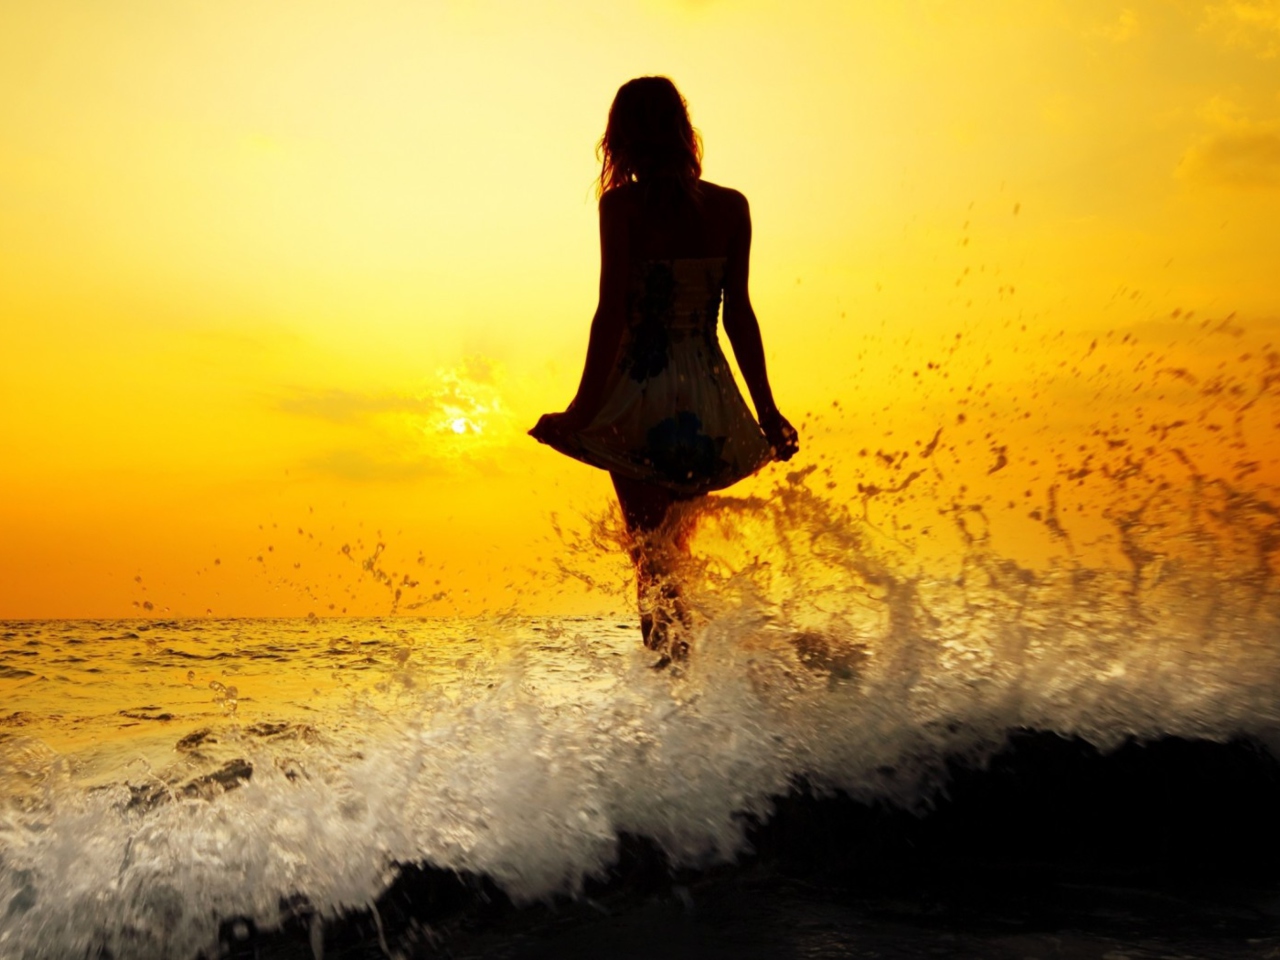 Girl Silhouette In Sea Waves At Sunset screenshot #1 1280x960